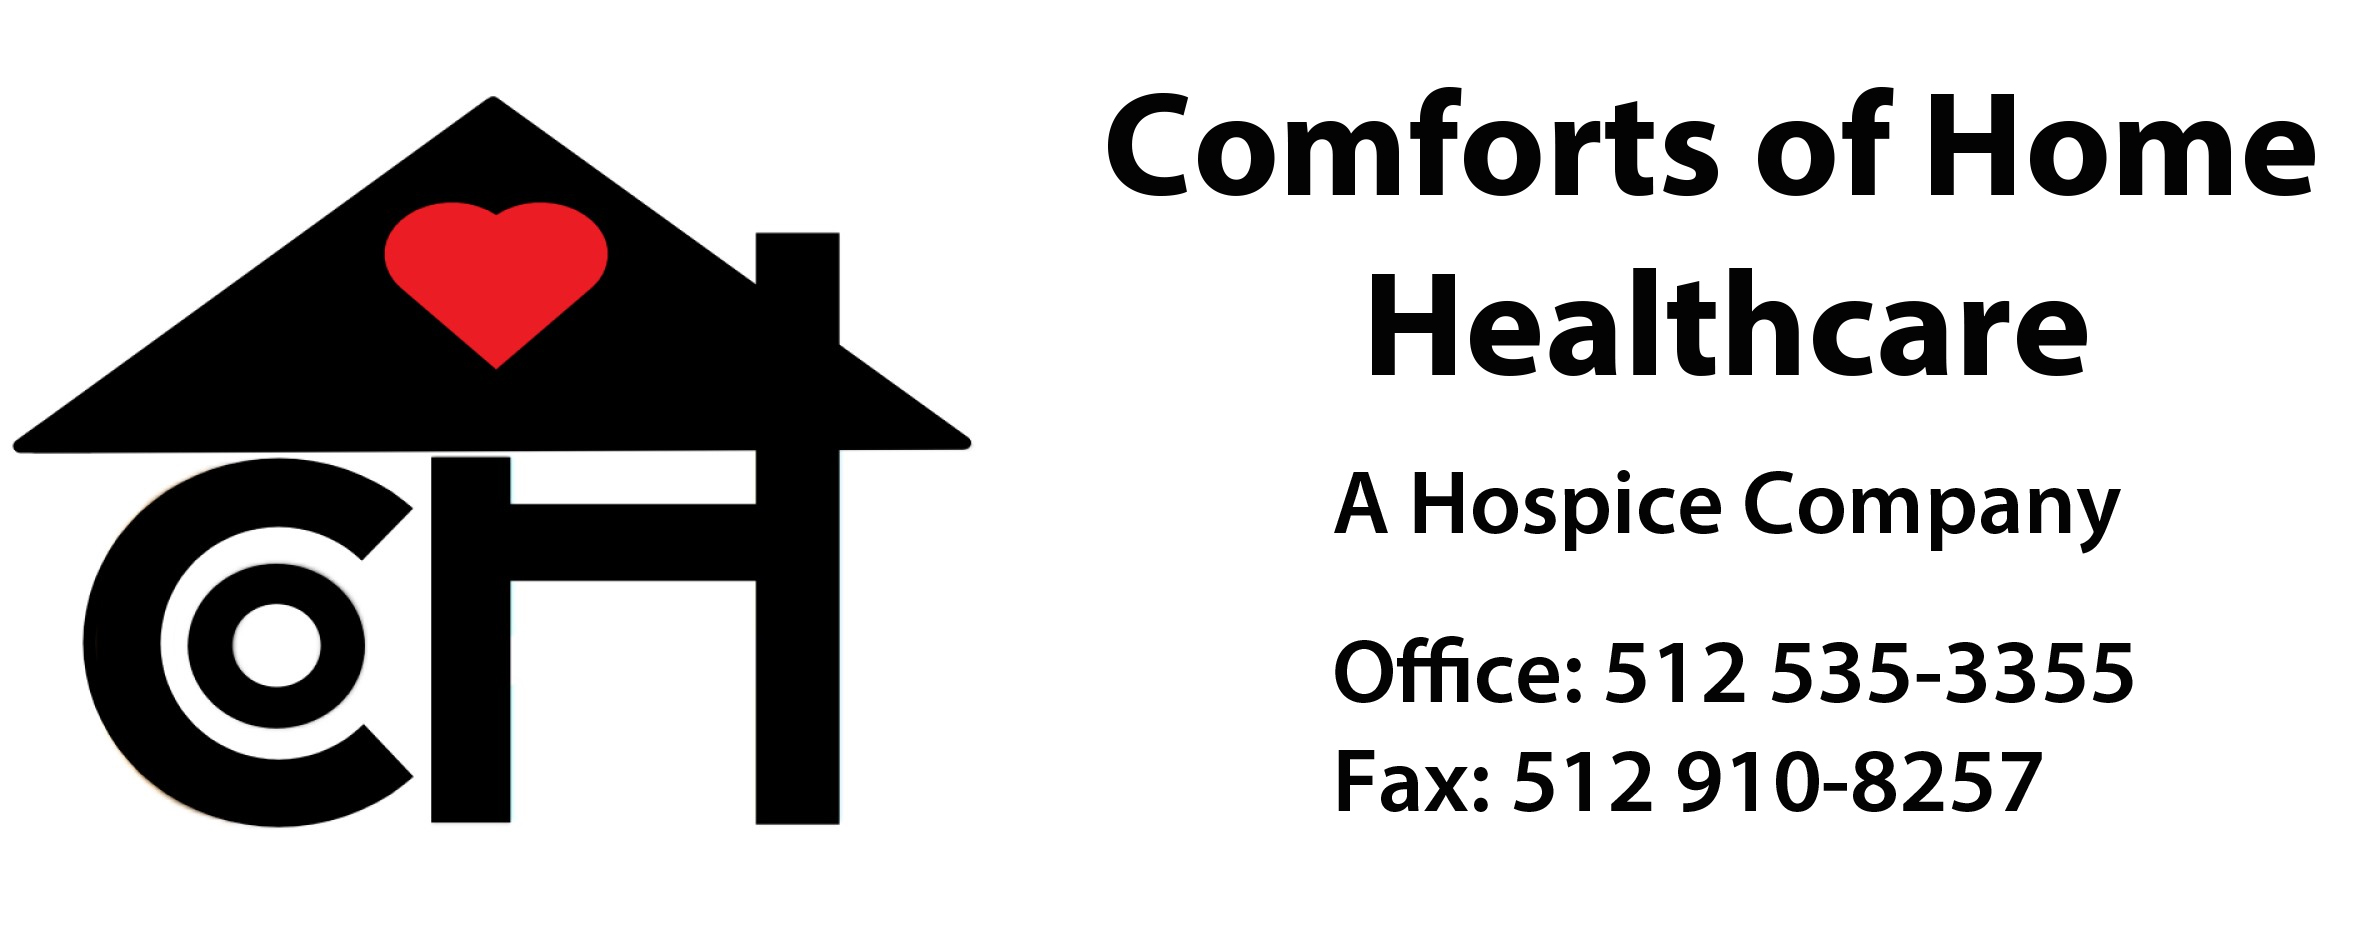 Comforts of Home logo